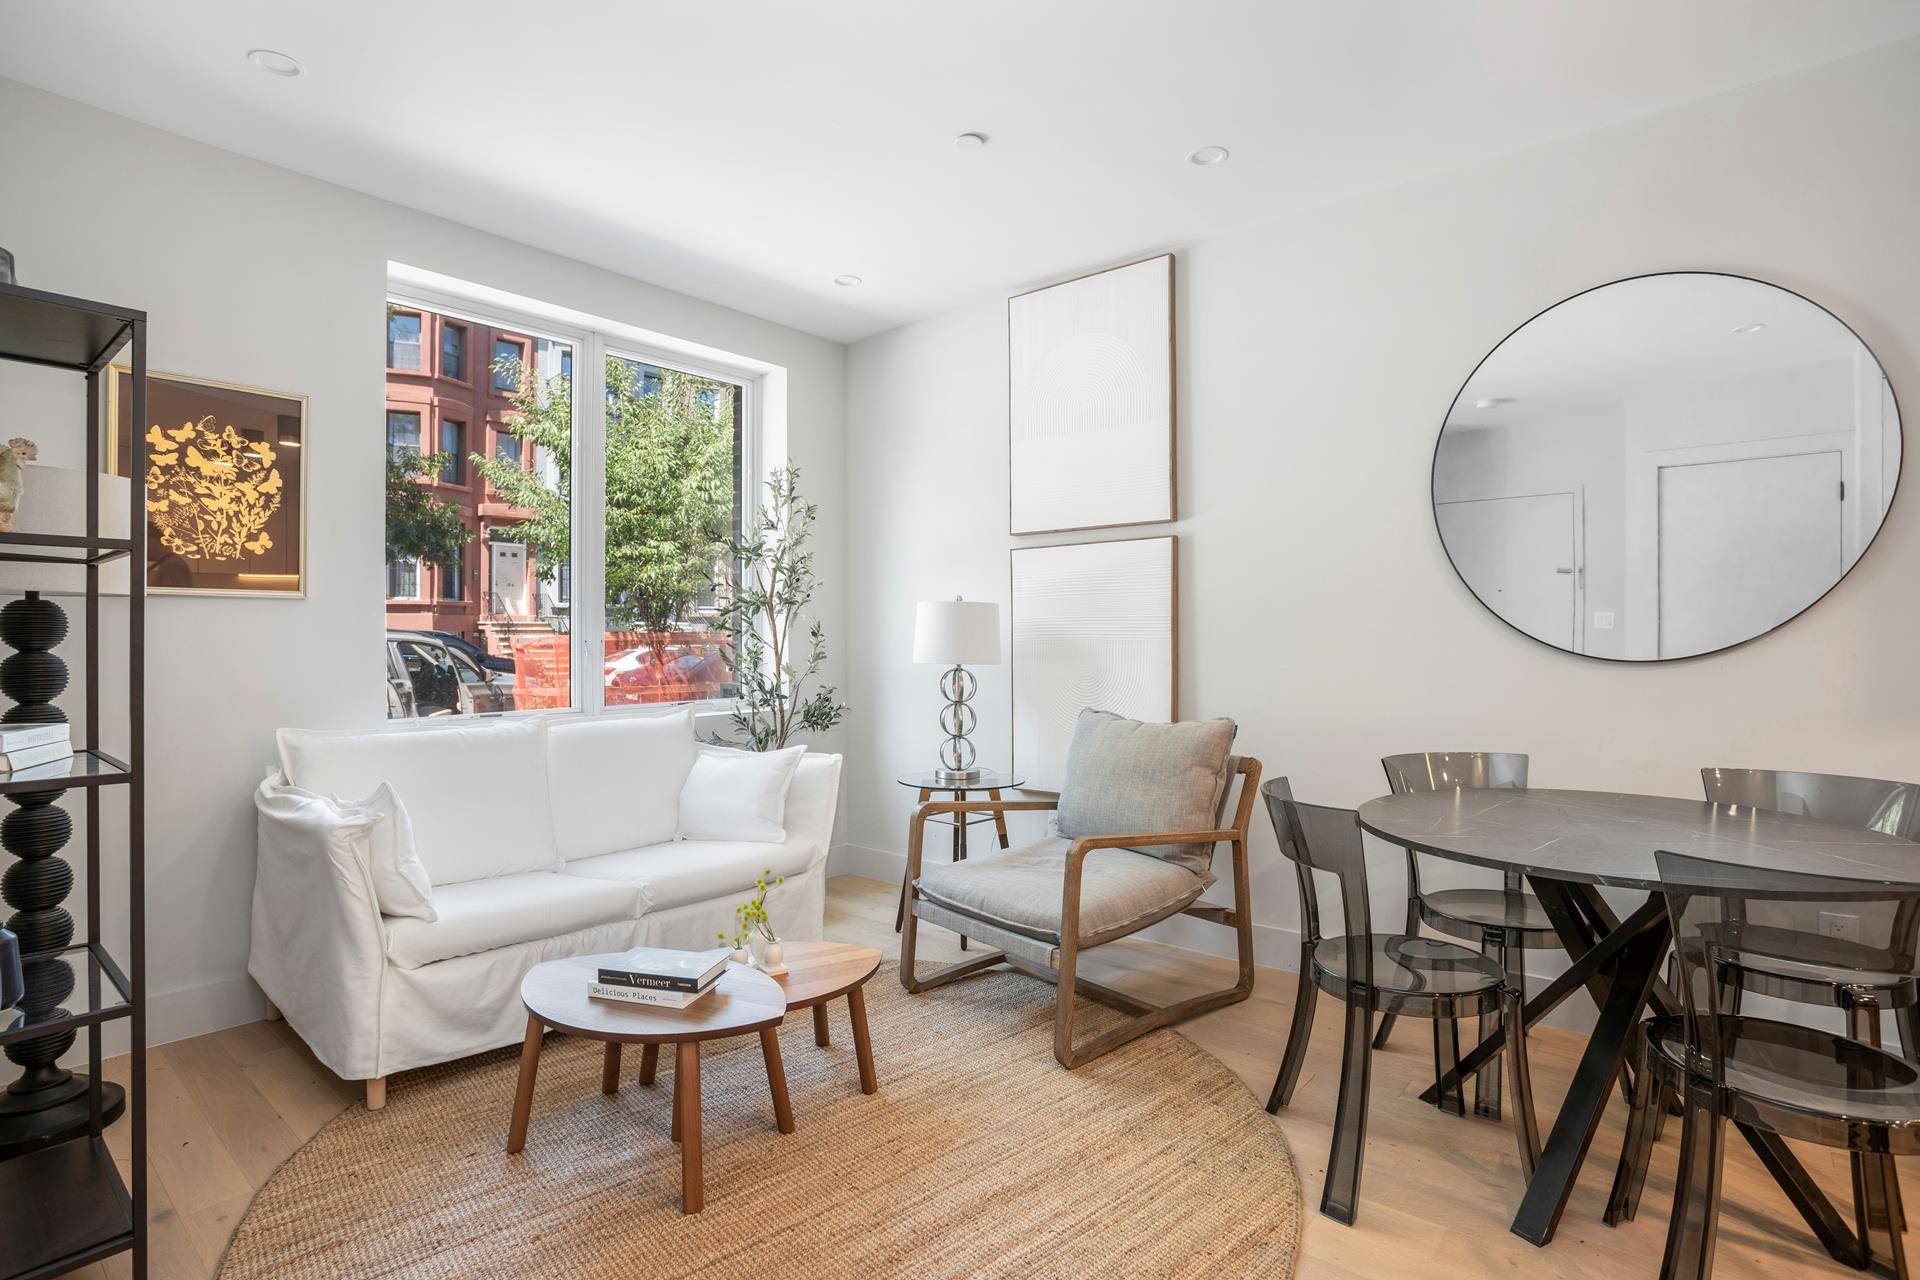 Discover luxury living at its finest at 106 Jefferson Ave, located on the boarder of Bedford Stuyvesant and Clinton Hill, Brooklyn.